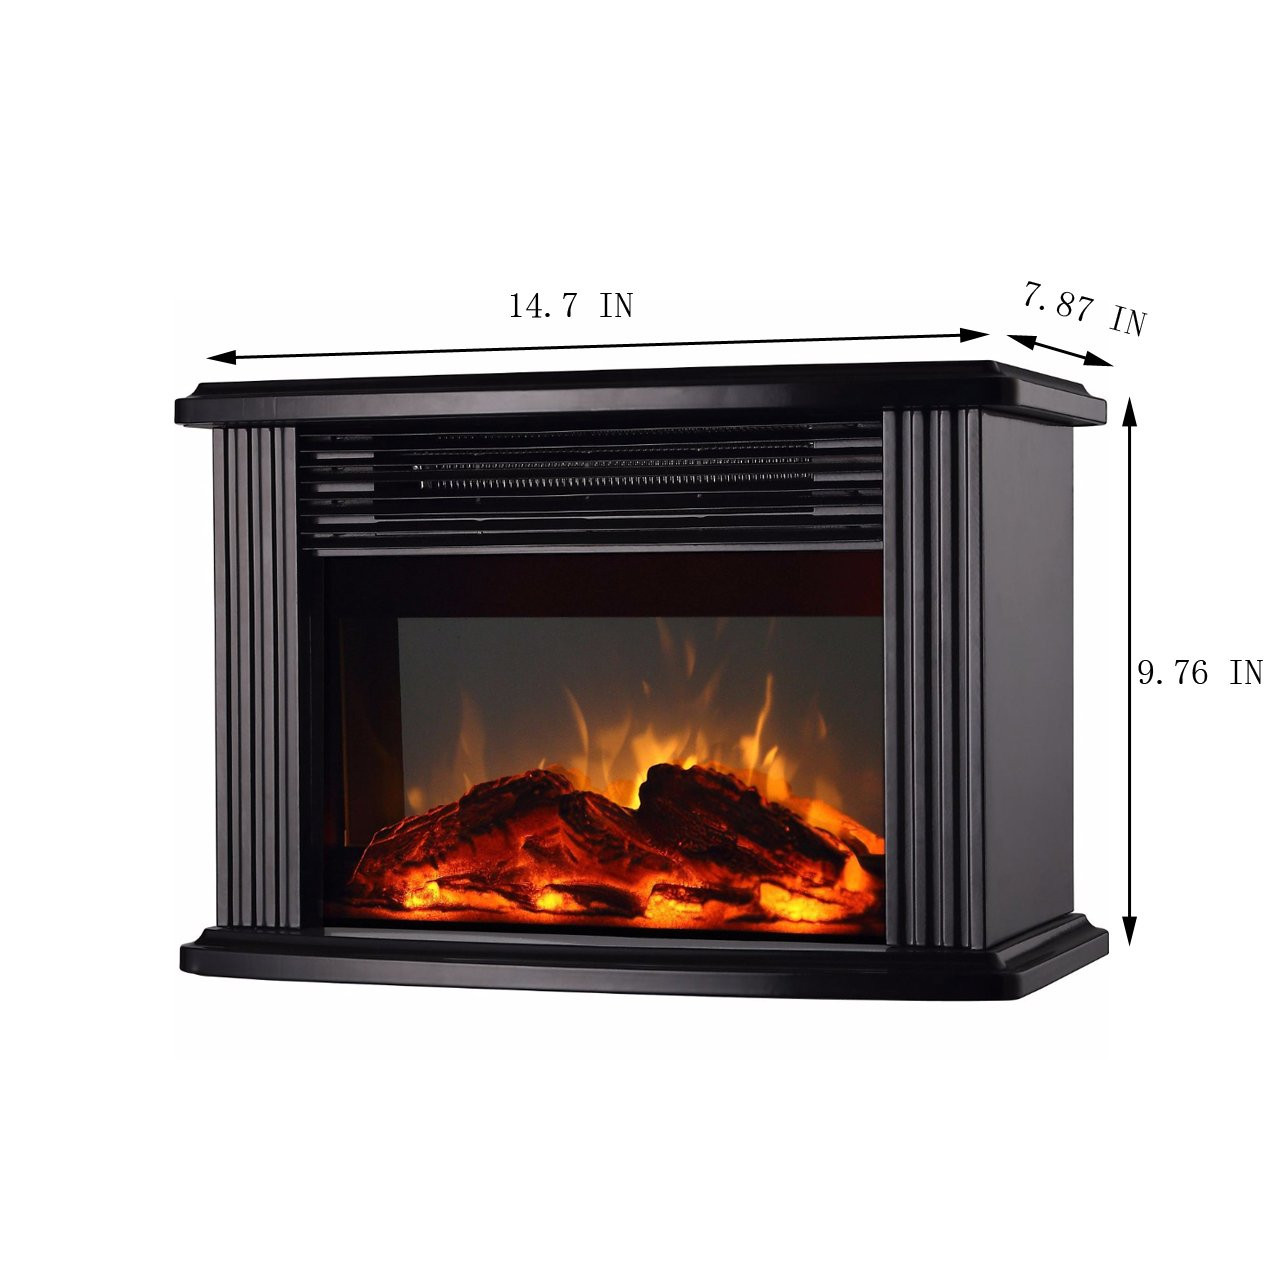 Table Top Electric Fireplace
 DONYER POWER 14" Mini Electric Fireplace Tabletop Portable